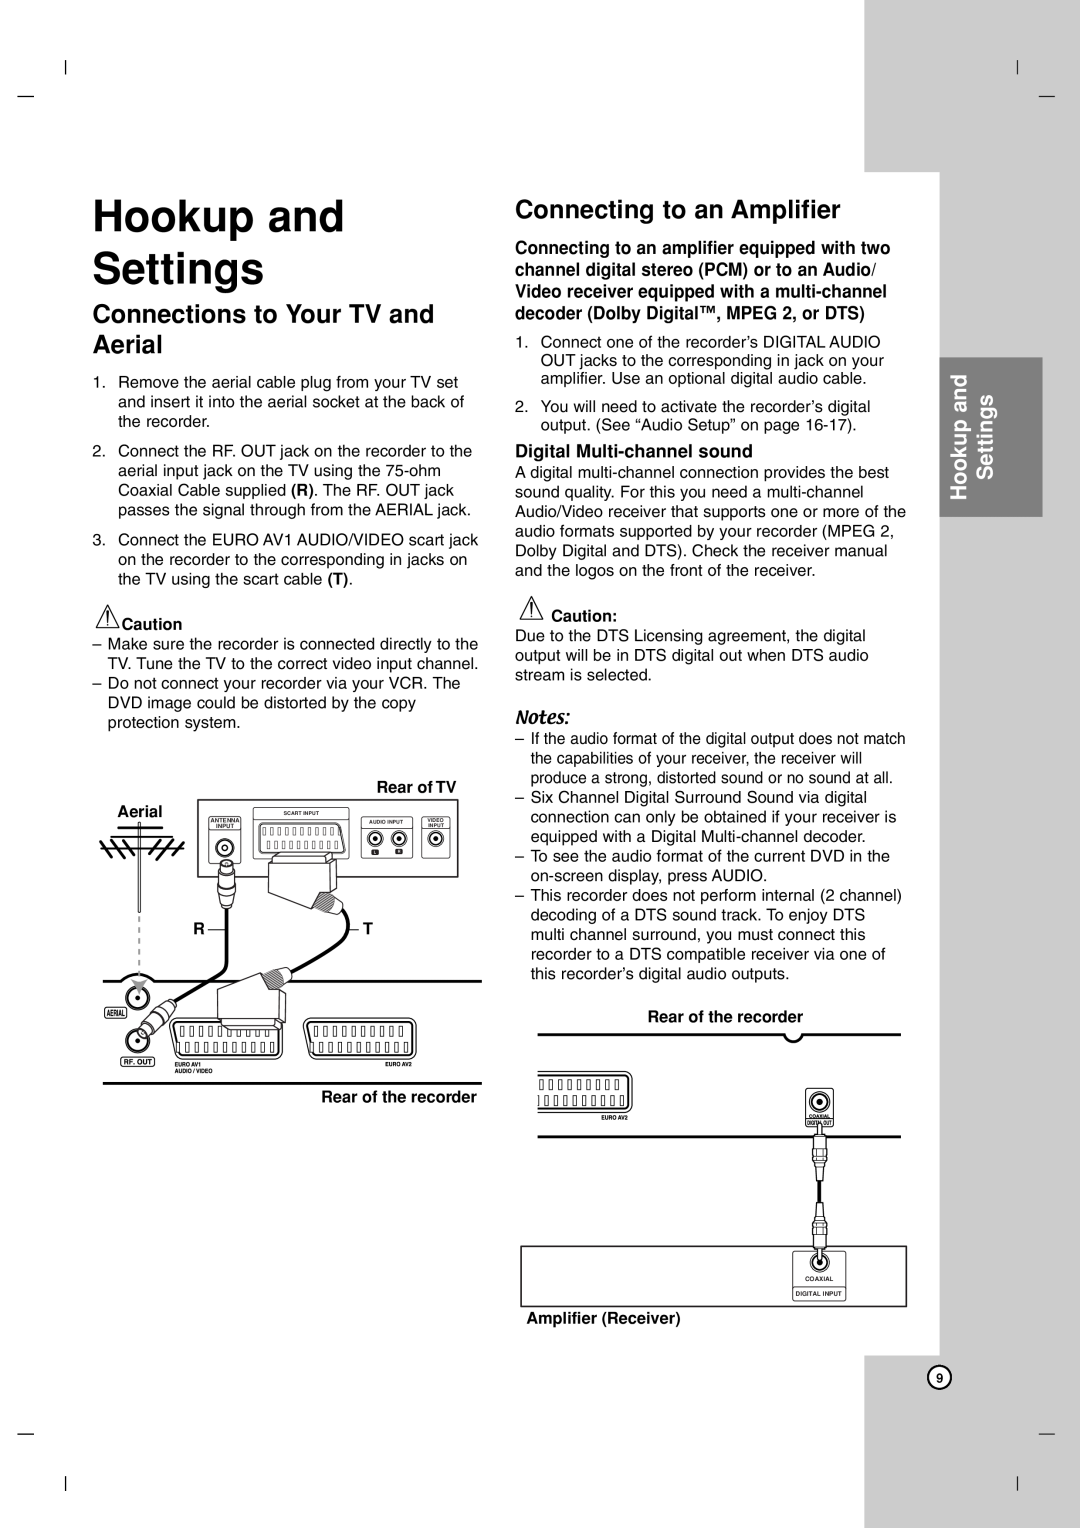 LG Electronics DR7400 Hookup and Settings, Connections to Your TV and Aerial, Connecting to an Amplifier, Rear of TV 